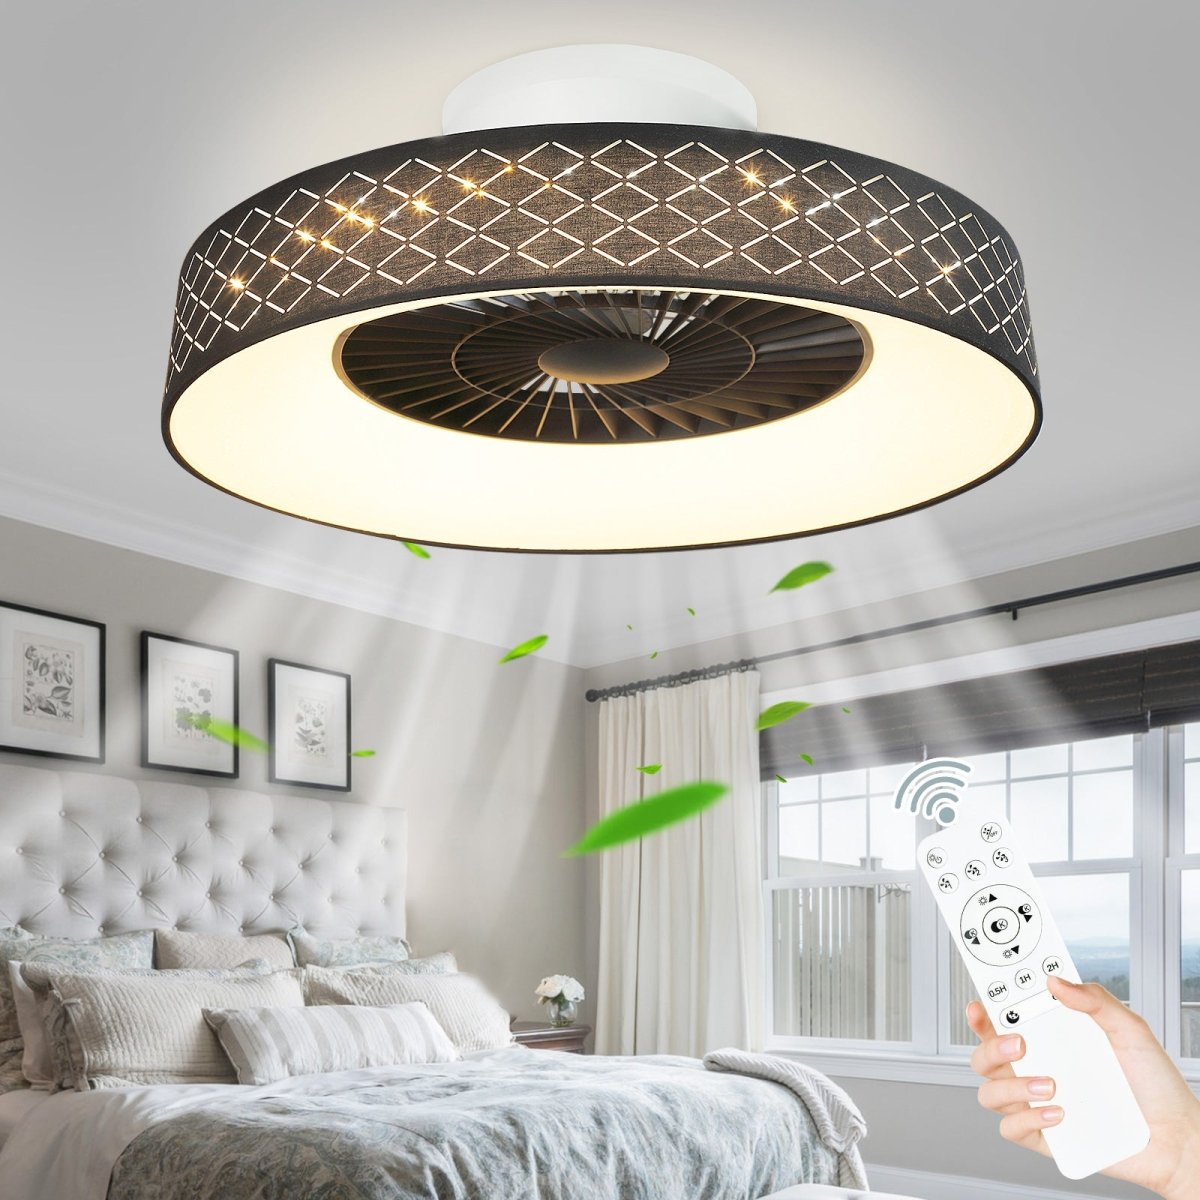 DLLT Low Profile Ceiling Fan with Light, 22.5'' LED Dimmable Ceiling Fans with Lights and Remote, Modern Bladeless Enclosed Ceiling Fan Flush Mount with Reverse Motor for Bedroom Living Room, Black Argyle - WS-FPZ47-40C-BS 2 | DEPULEY